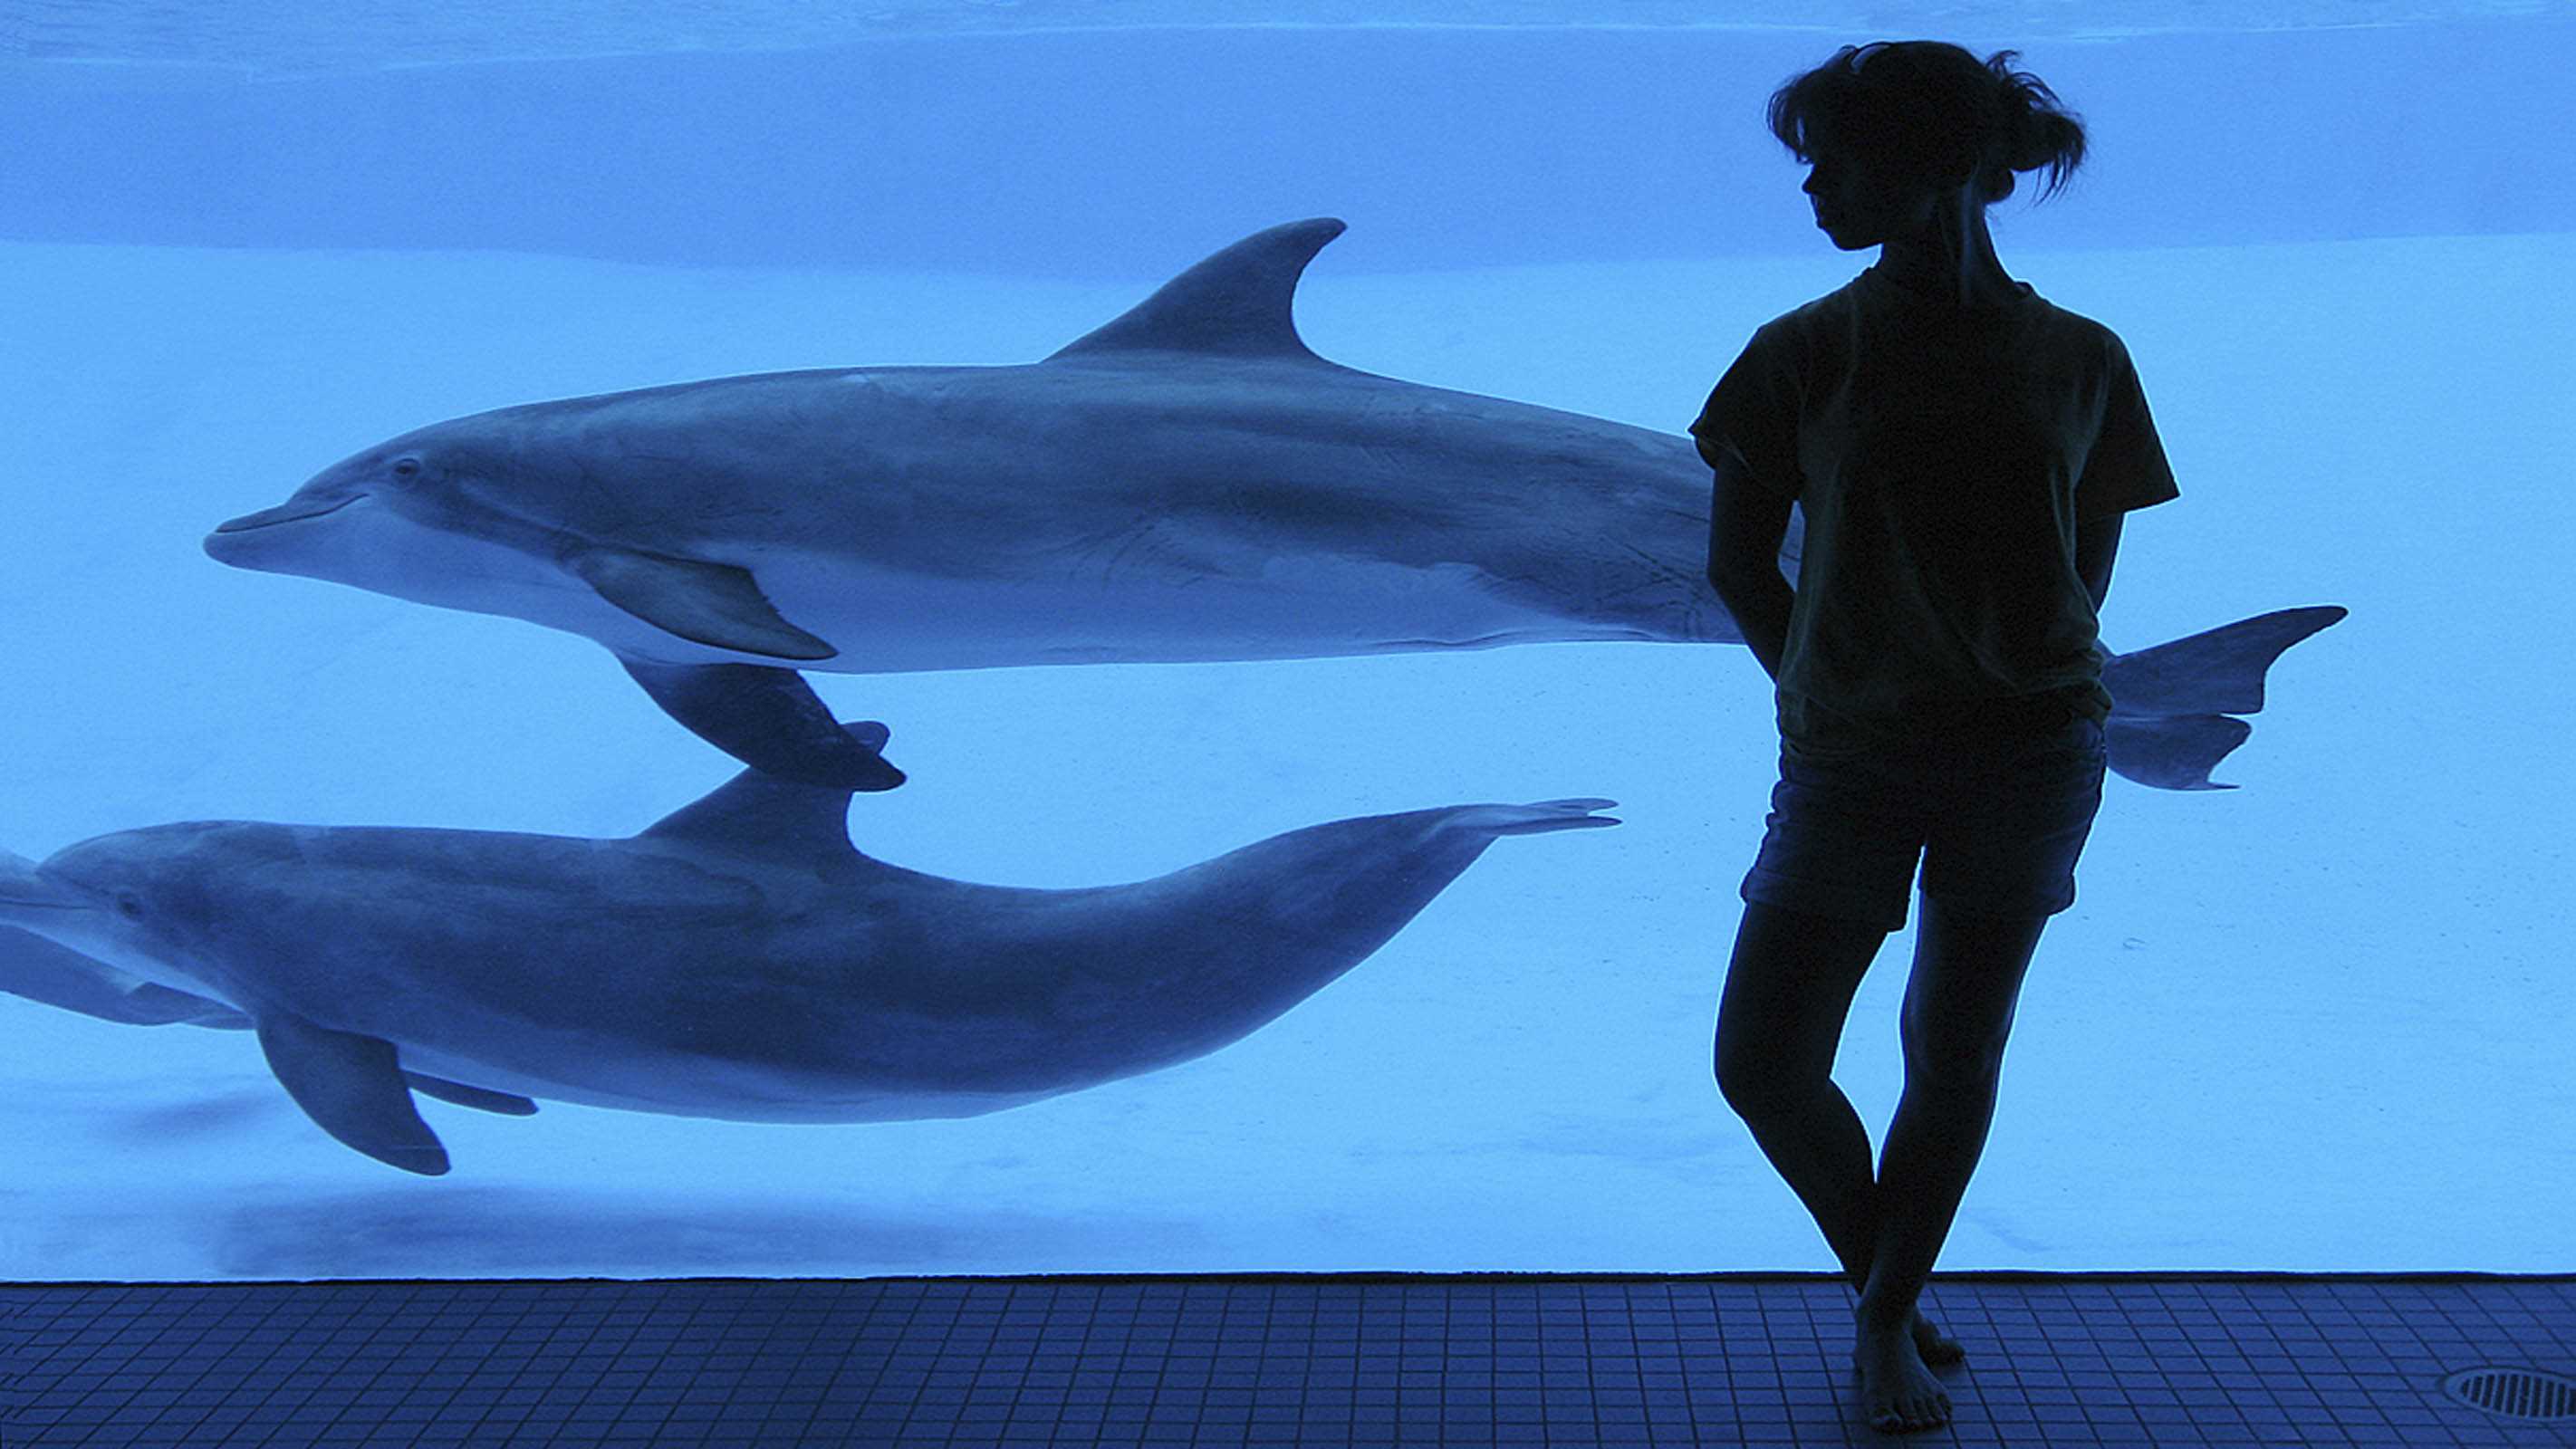 Dolphins in captivity: should dolphinariums be banned? - netivist